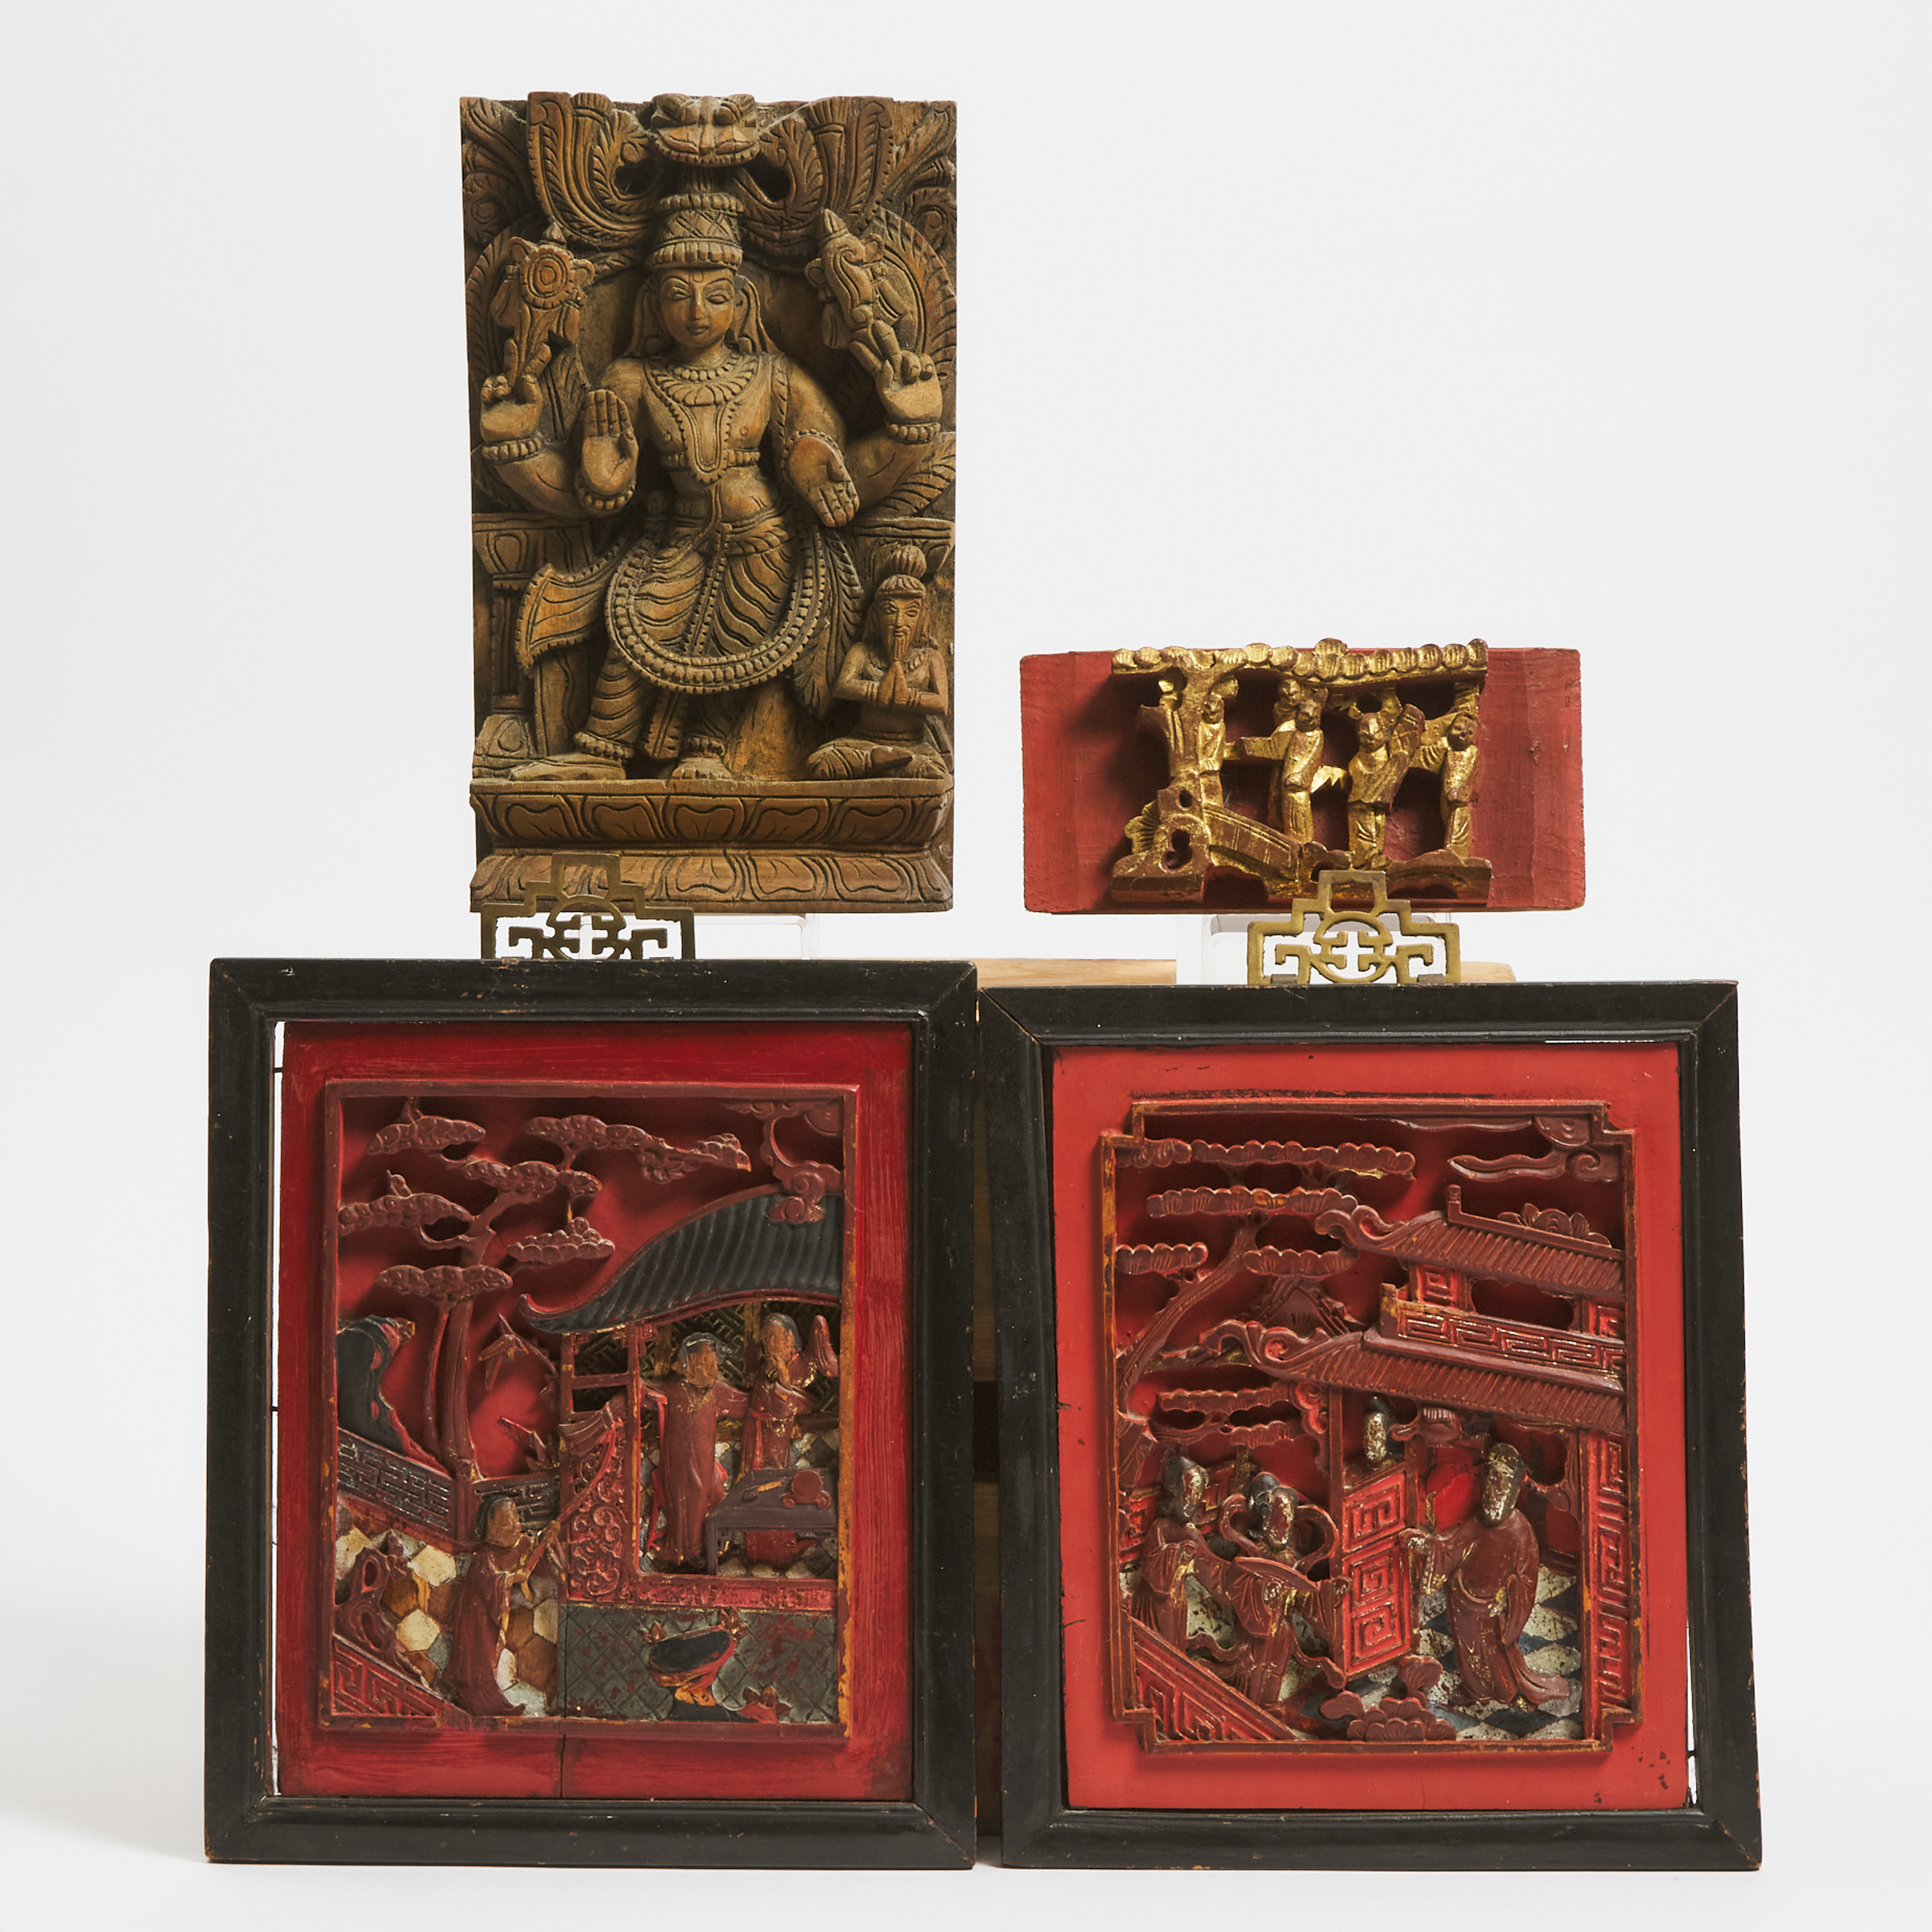 A Group of Three Chinese Wood Carvings, Together With an Indian Wood Carved Panel, 19th/20th Century